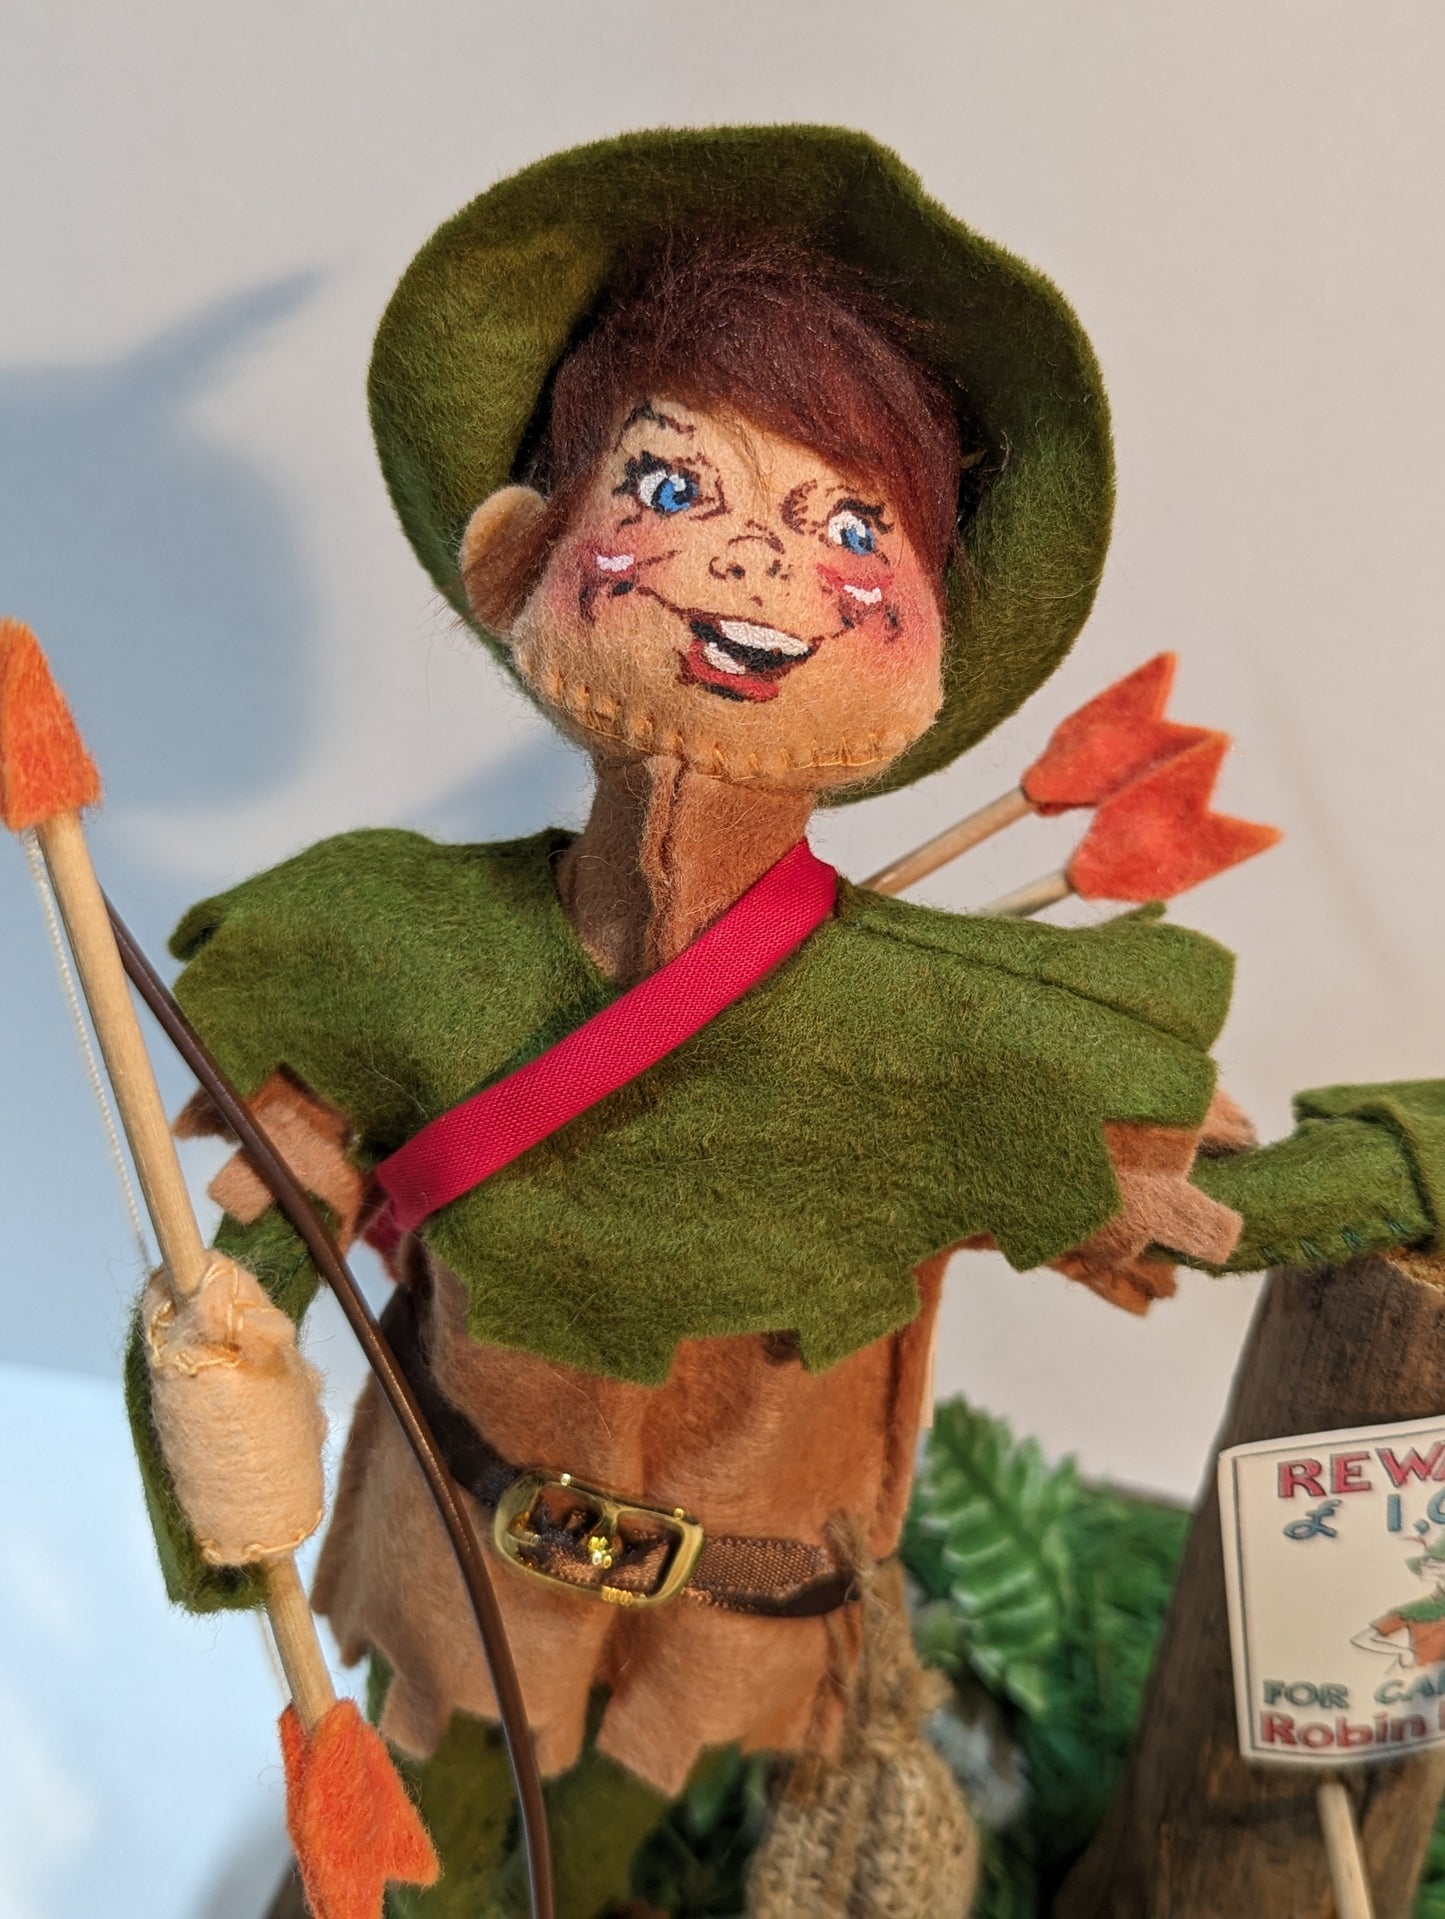 10" Robin Hood with Base 960484 Annalee  Signed